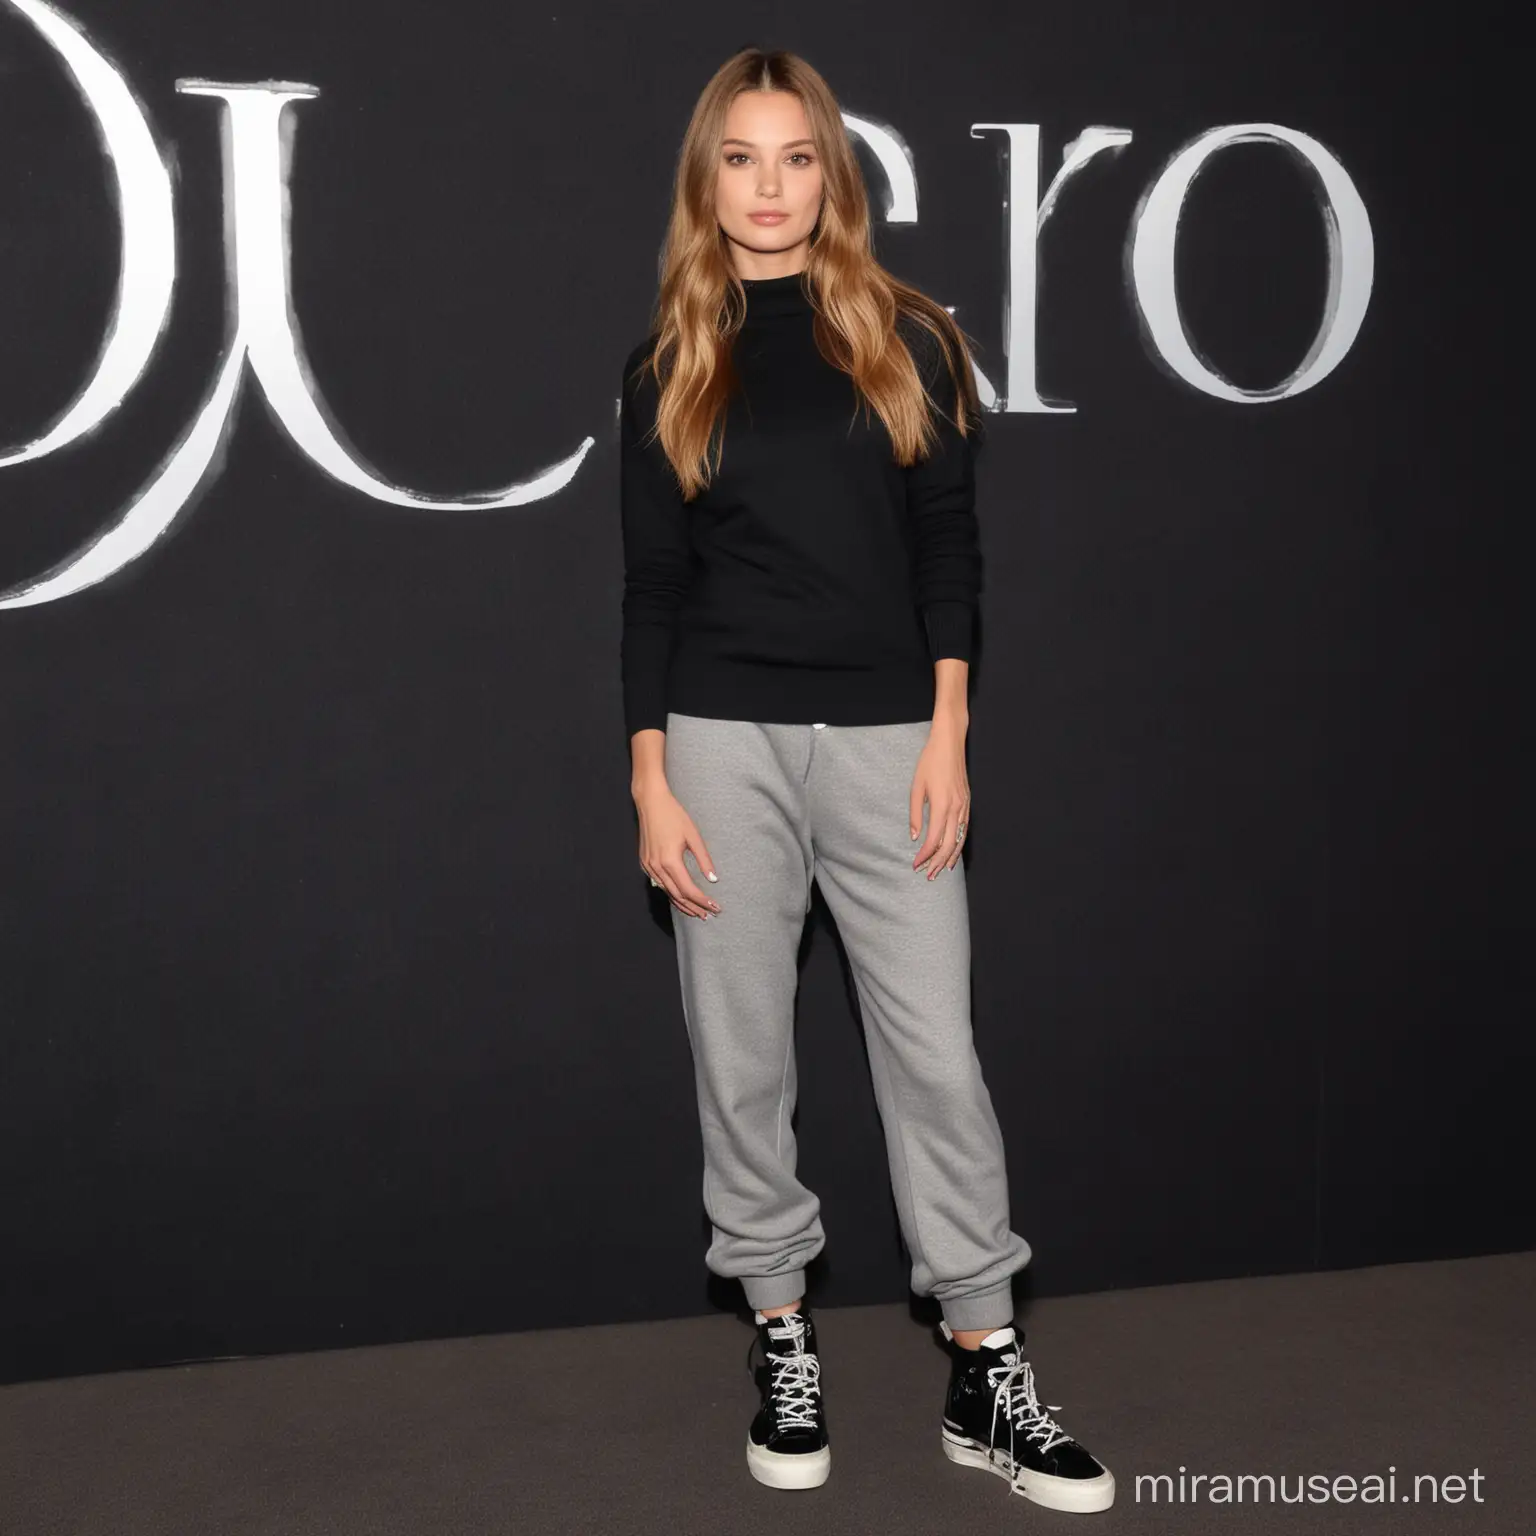 Stylish Young Woman in Gray Sweater and Black Trousers at Dior Event